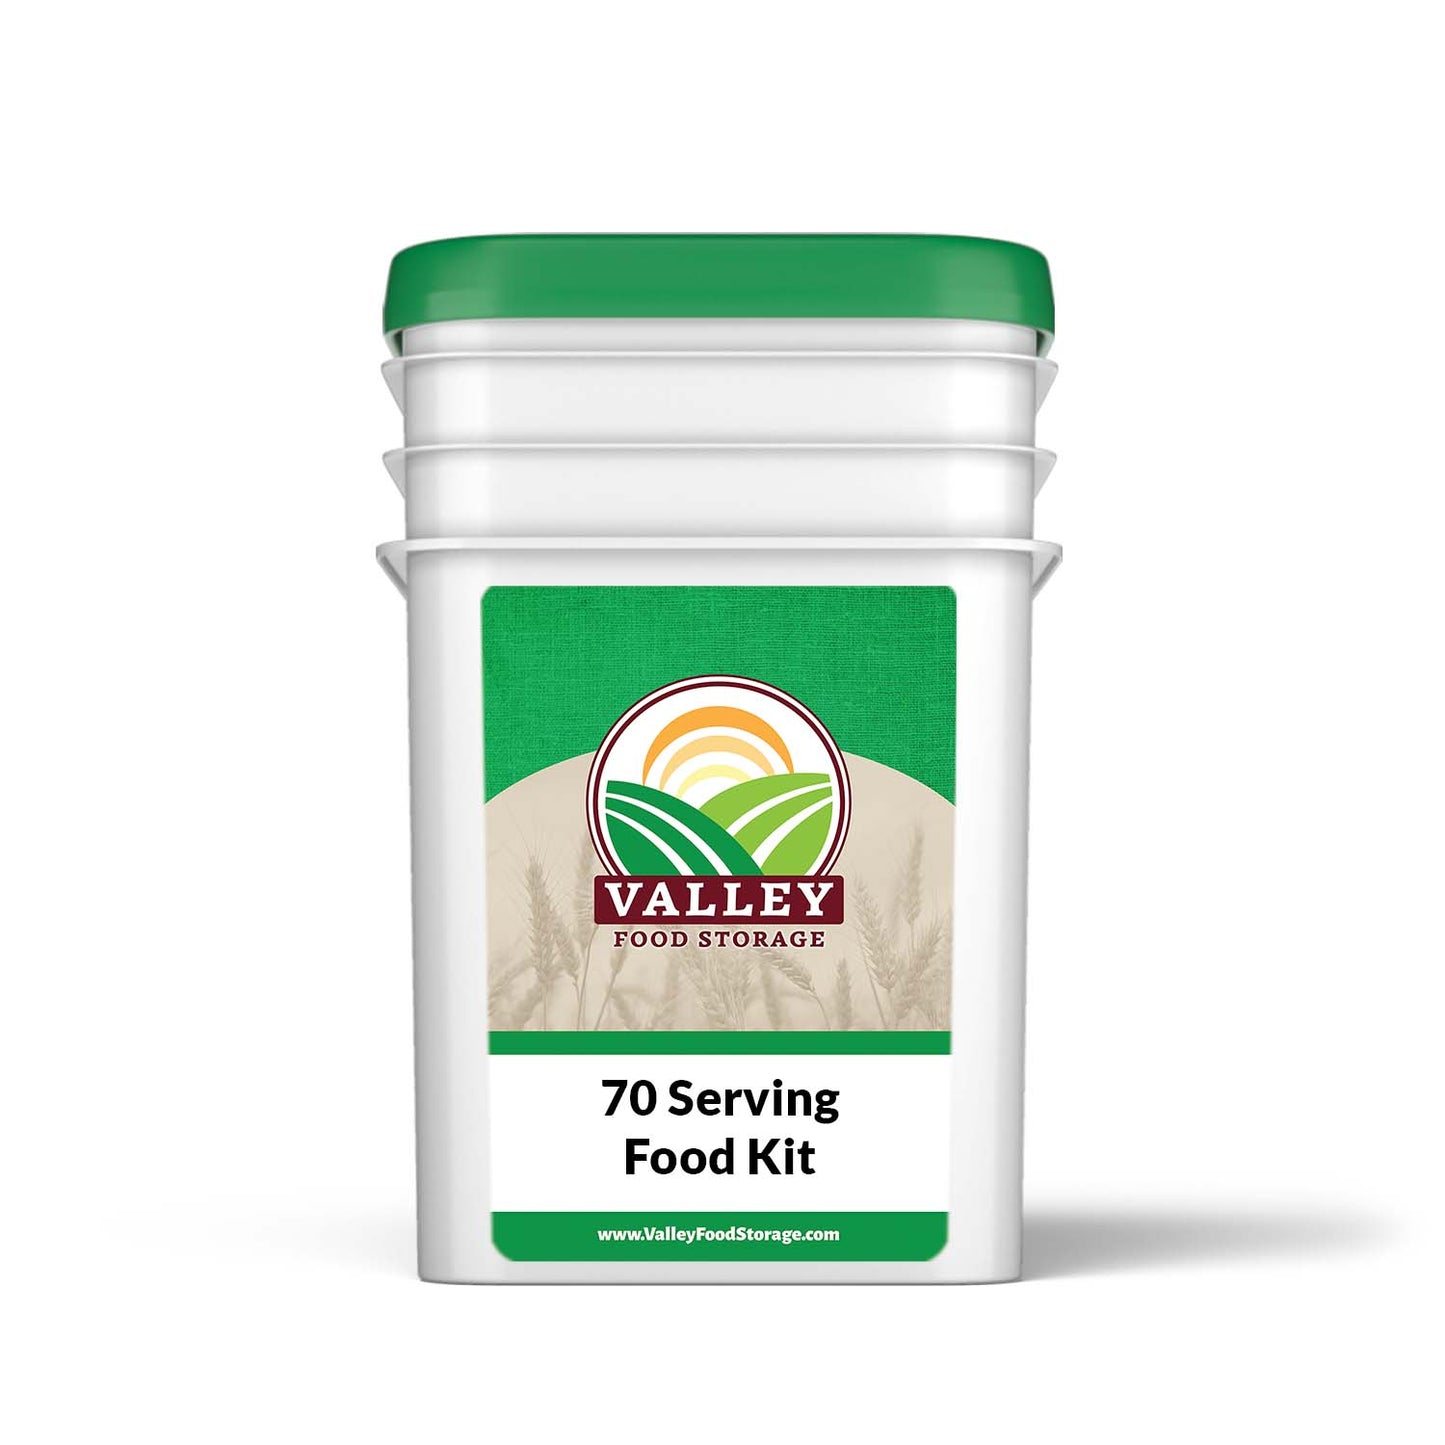 70 Serving Kit From Valley Food Storage